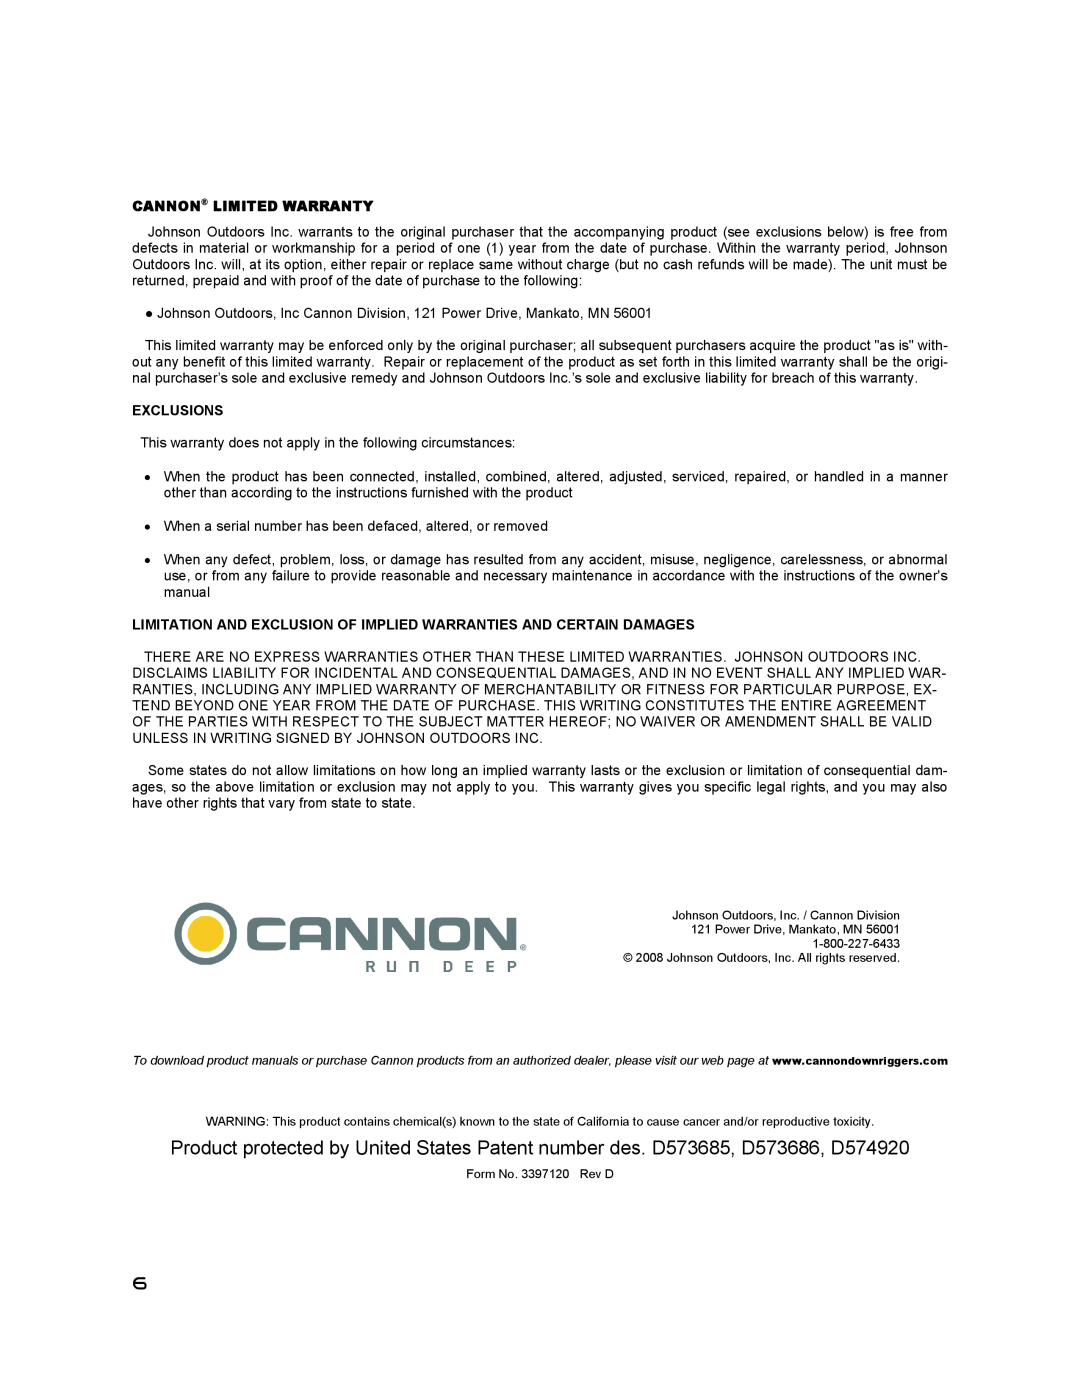 Cannon 1907020 Cannon Limited Warranty, Exclusions, Limitation And Exclusion Of Implied Warranties And Certain Damages 